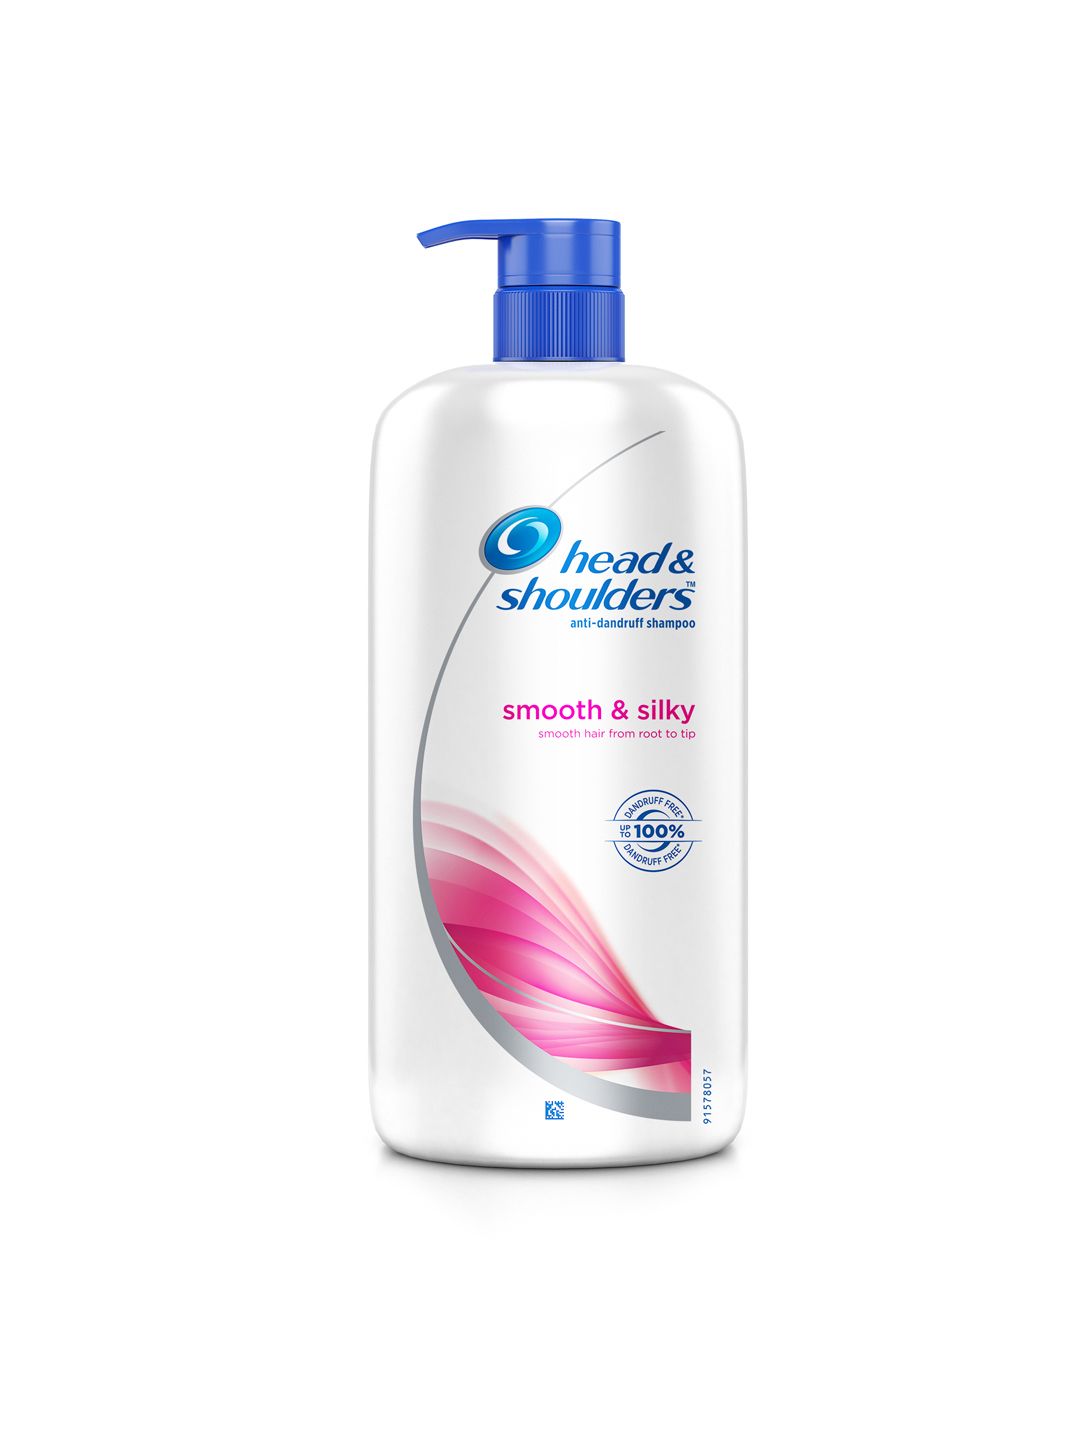 Head & Shoulders Unisex Smooth & Silky Shampoo 1 Litre Price in India